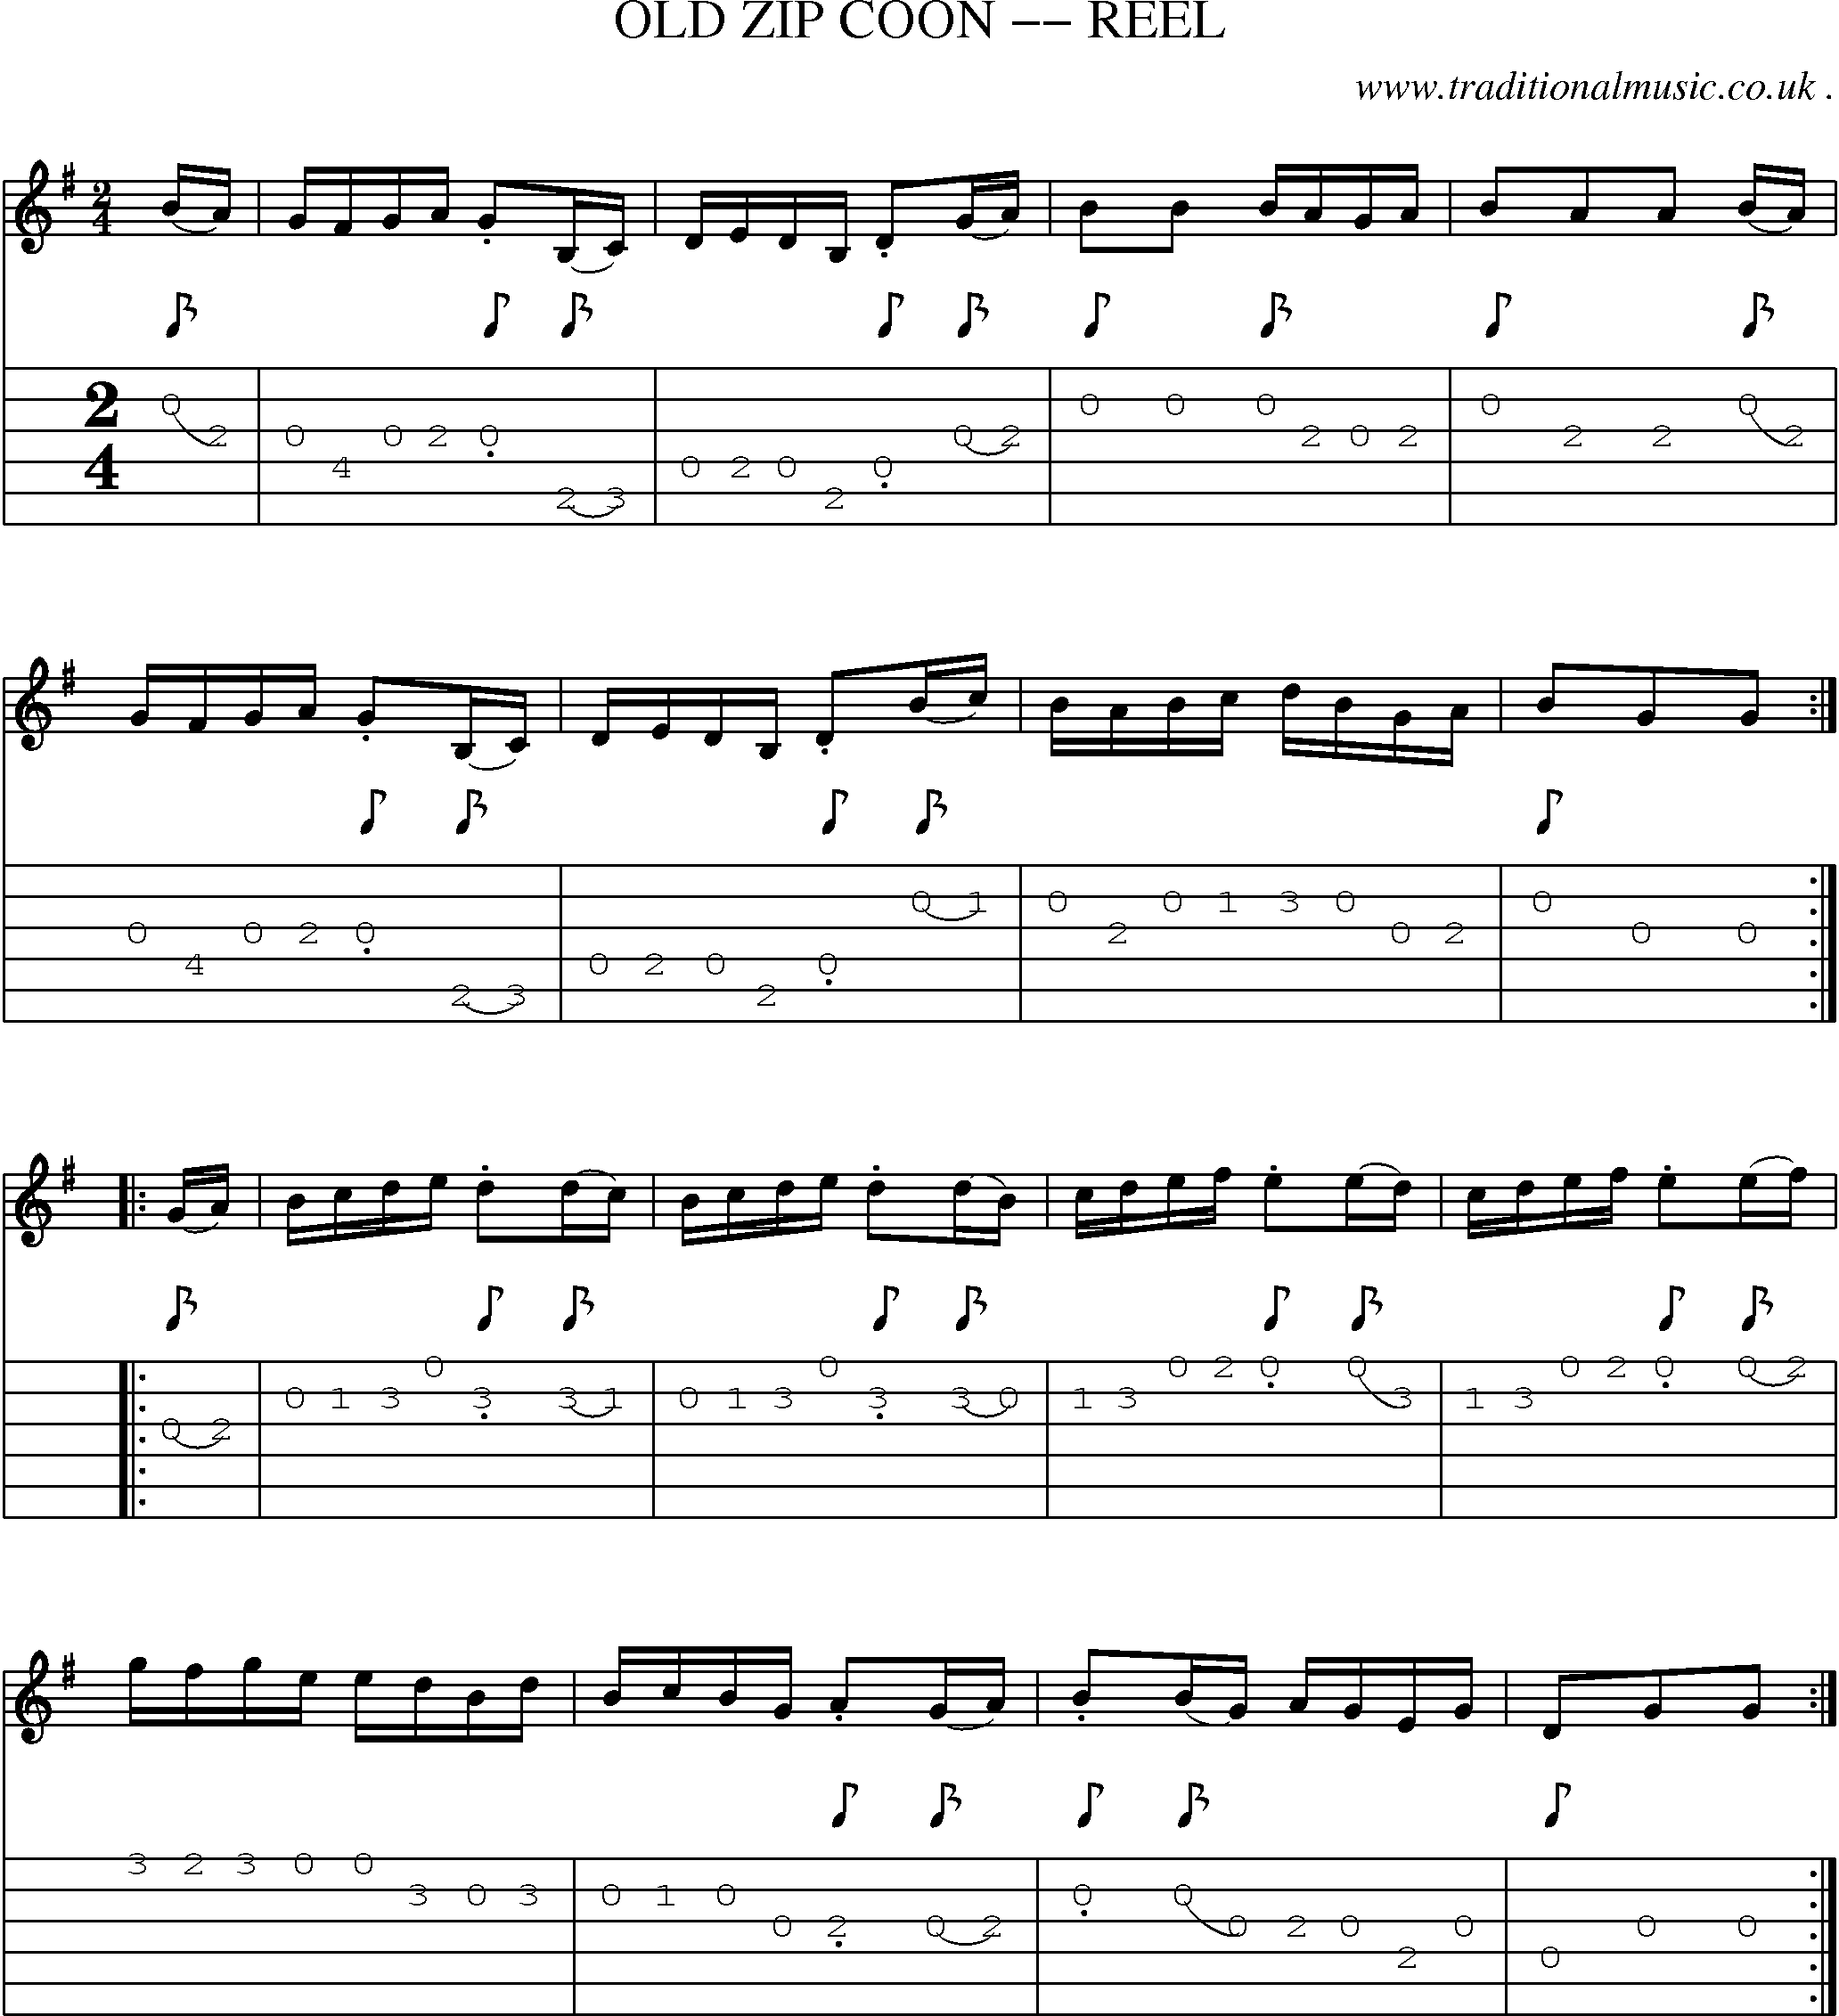 Music Score and Guitar Tabs for Old Zip Coon Reel